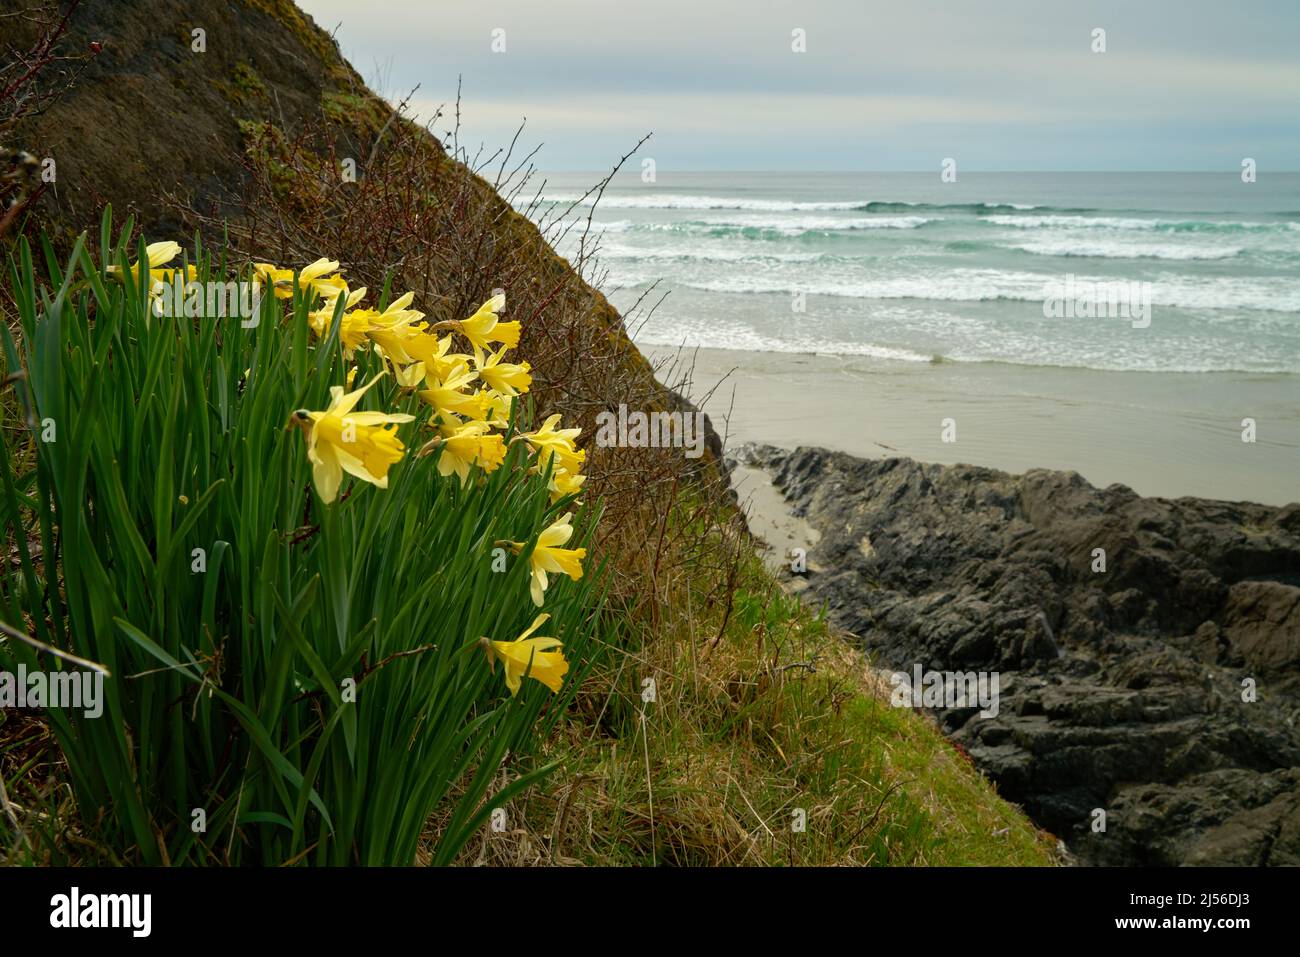 Northwest Coast Daffodils. Daffodils growing on a rock face on the edge of the Pacific Ocean shoreline. Stock Photo